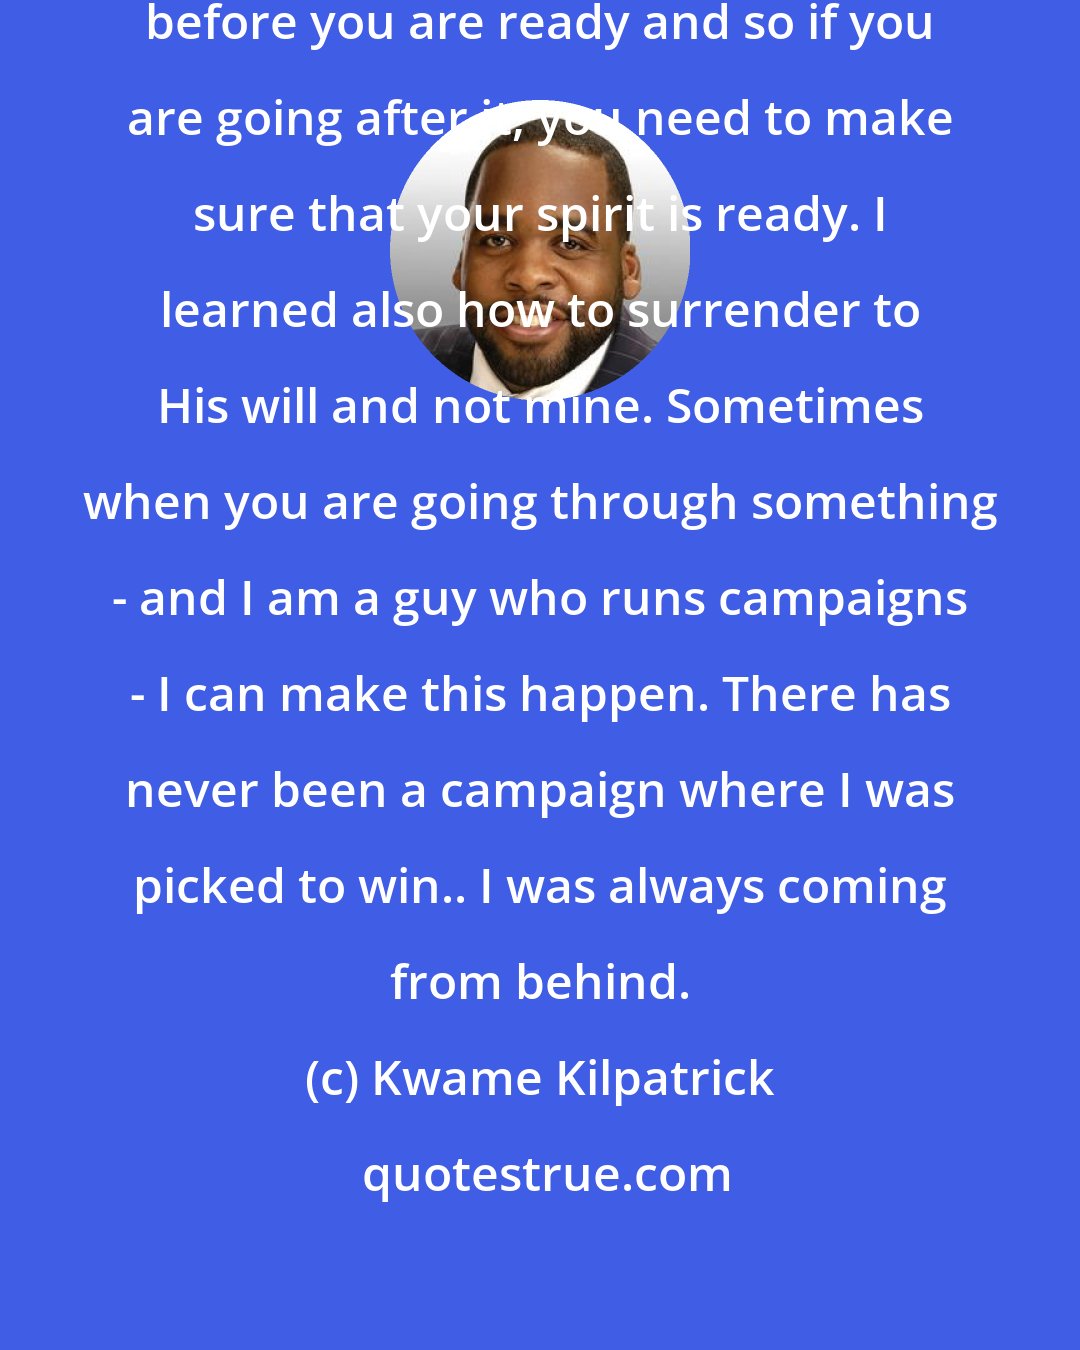 Kwame Kilpatrick: I learned that you can go after things before you are ready and so if you are going after it, you need to make sure that your spirit is ready. I learned also how to surrender to His will and not mine. Sometimes when you are going through something - and I am a guy who runs campaigns - I can make this happen. There has never been a campaign where I was picked to win.. I was always coming from behind.